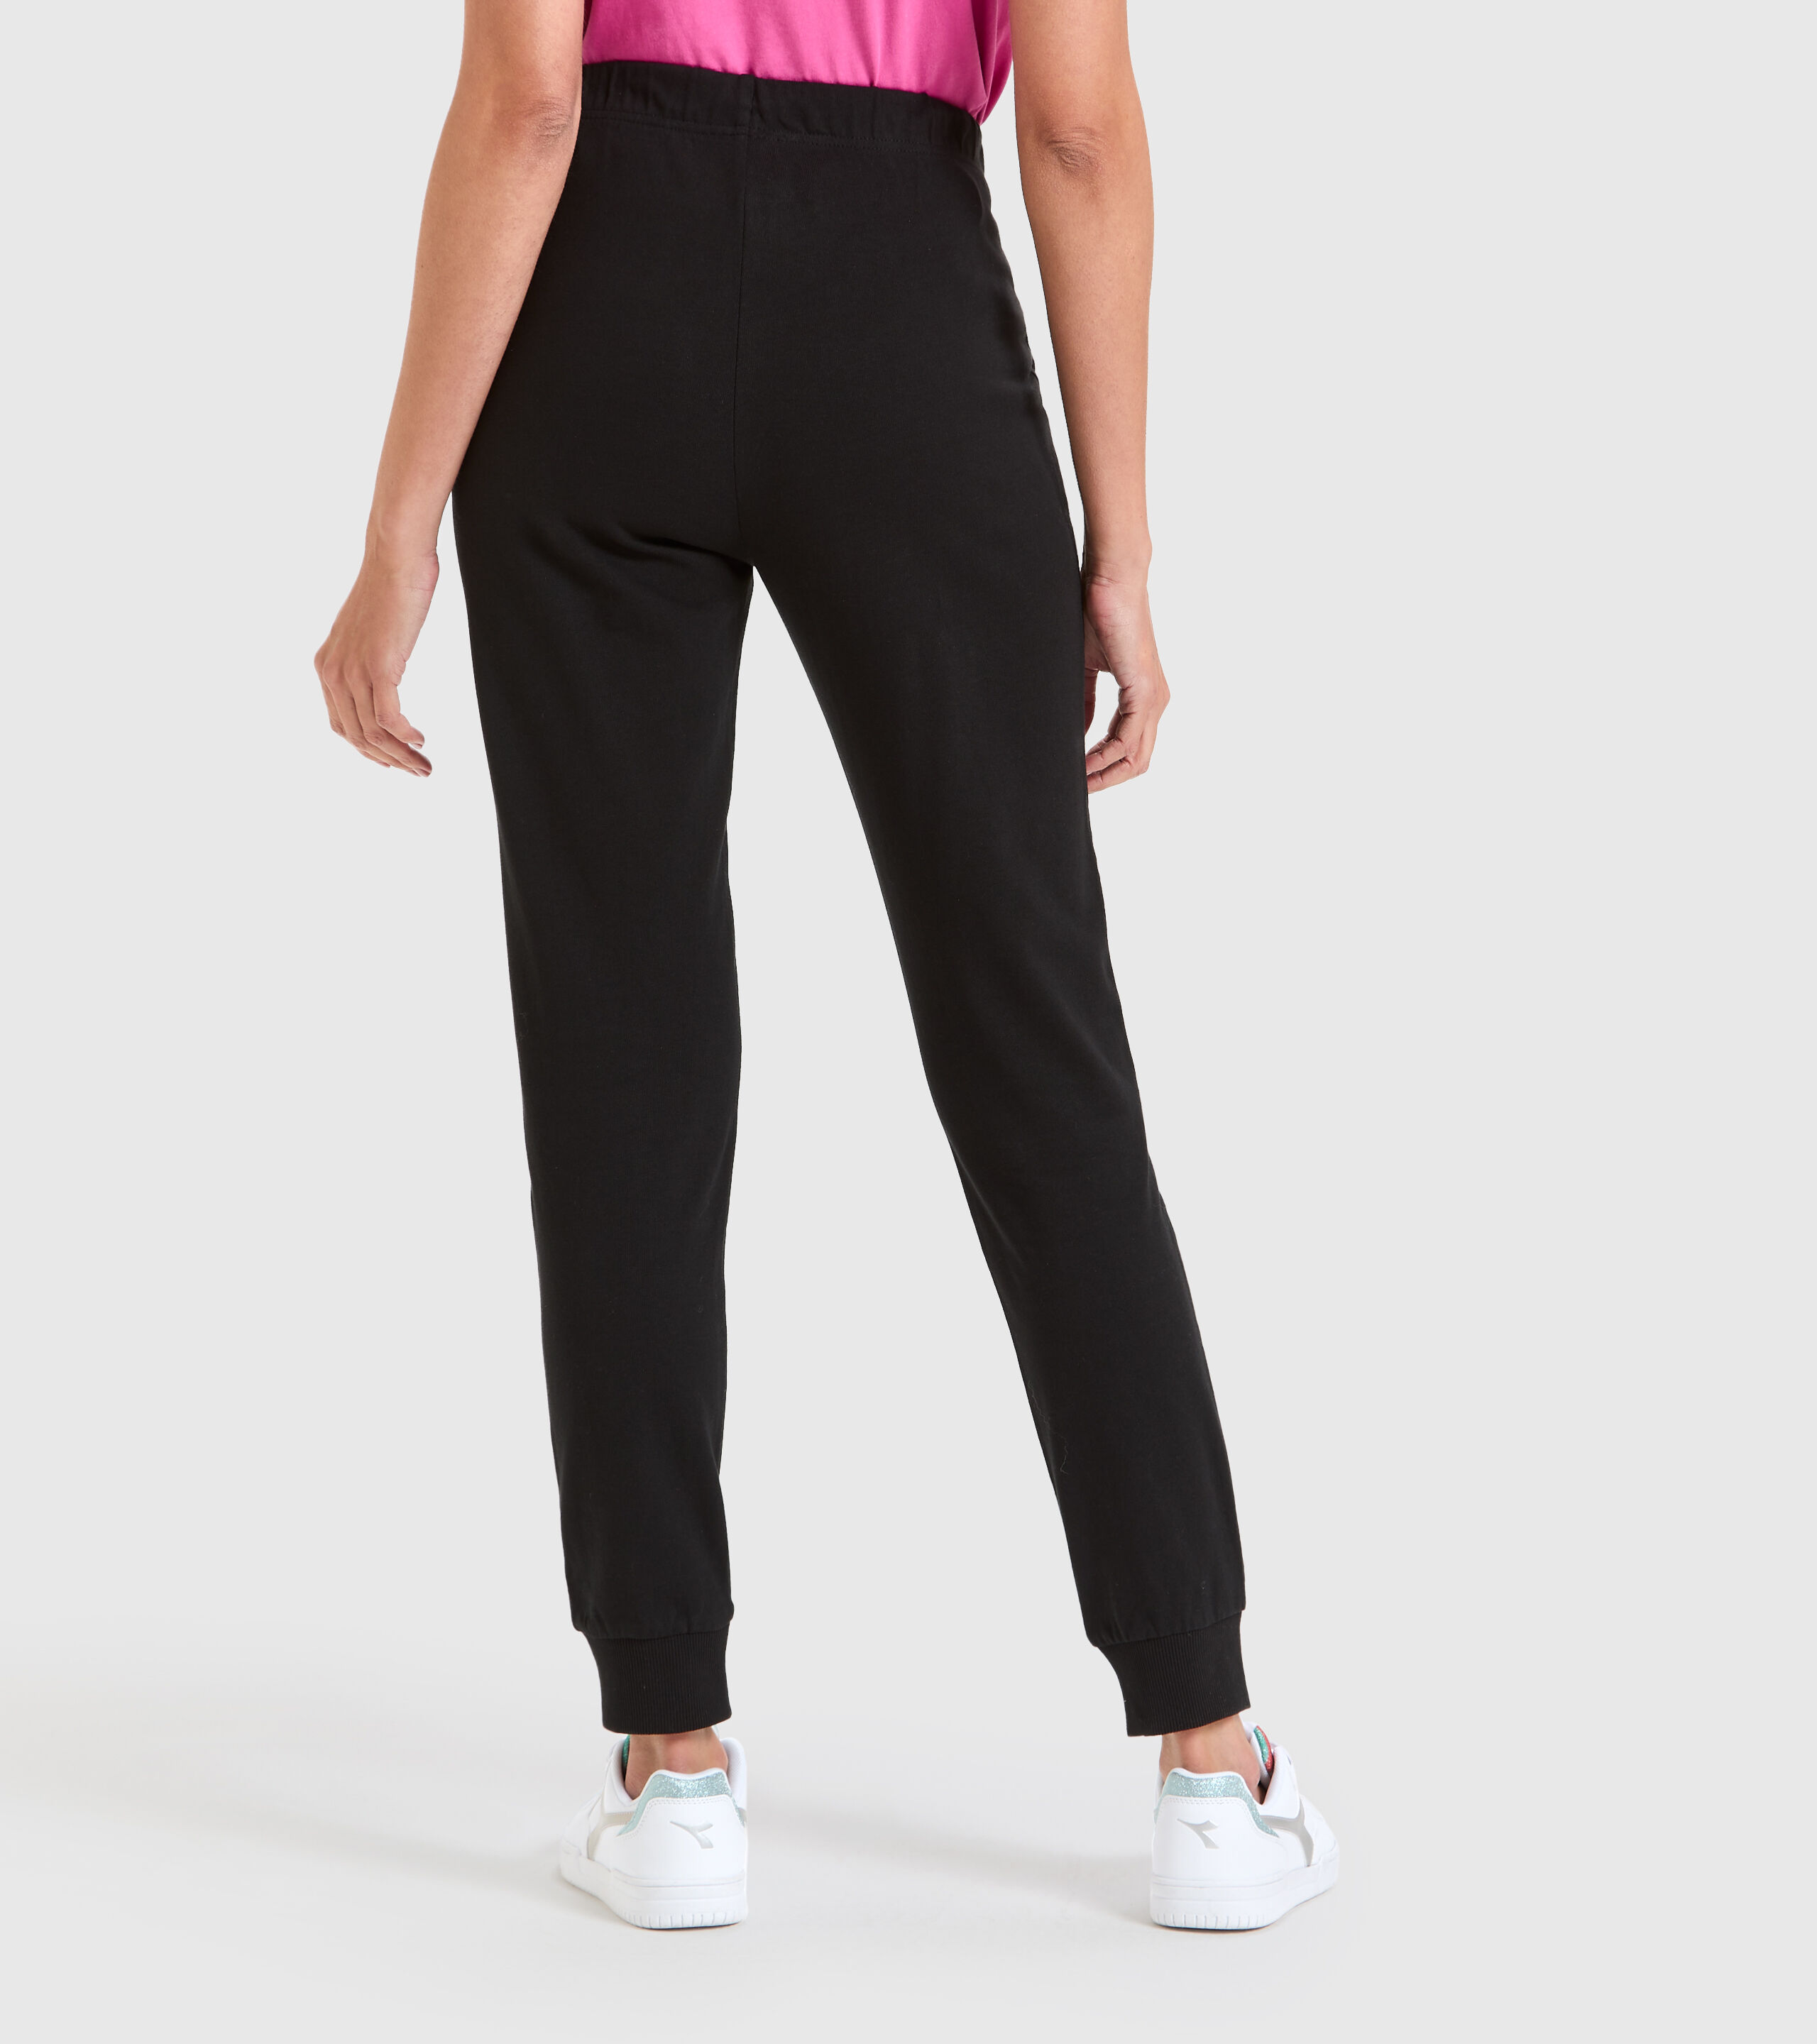 3/4 Length Tight Running Trousers Black/Teaberry Large Details about   Diadora Sport Women's L 